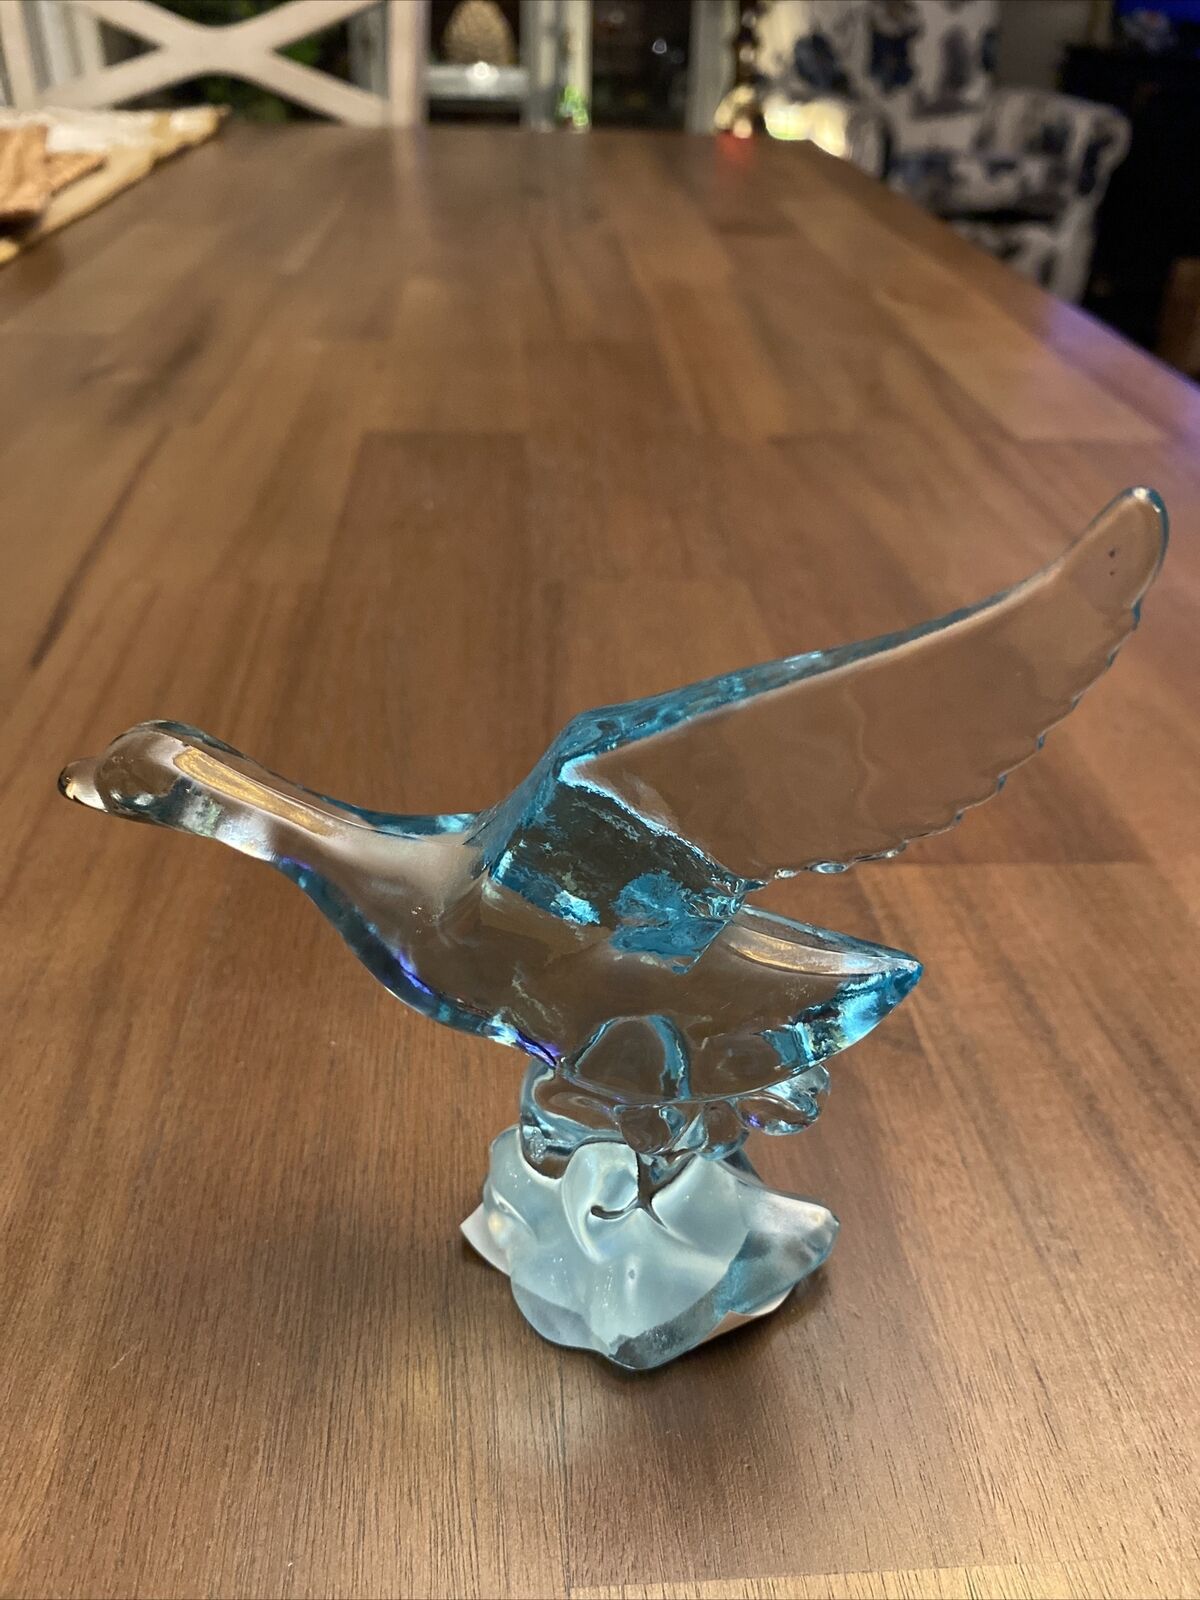 Imperial Glass Flying Duck From Heisey Mold Measuring 5” Tall